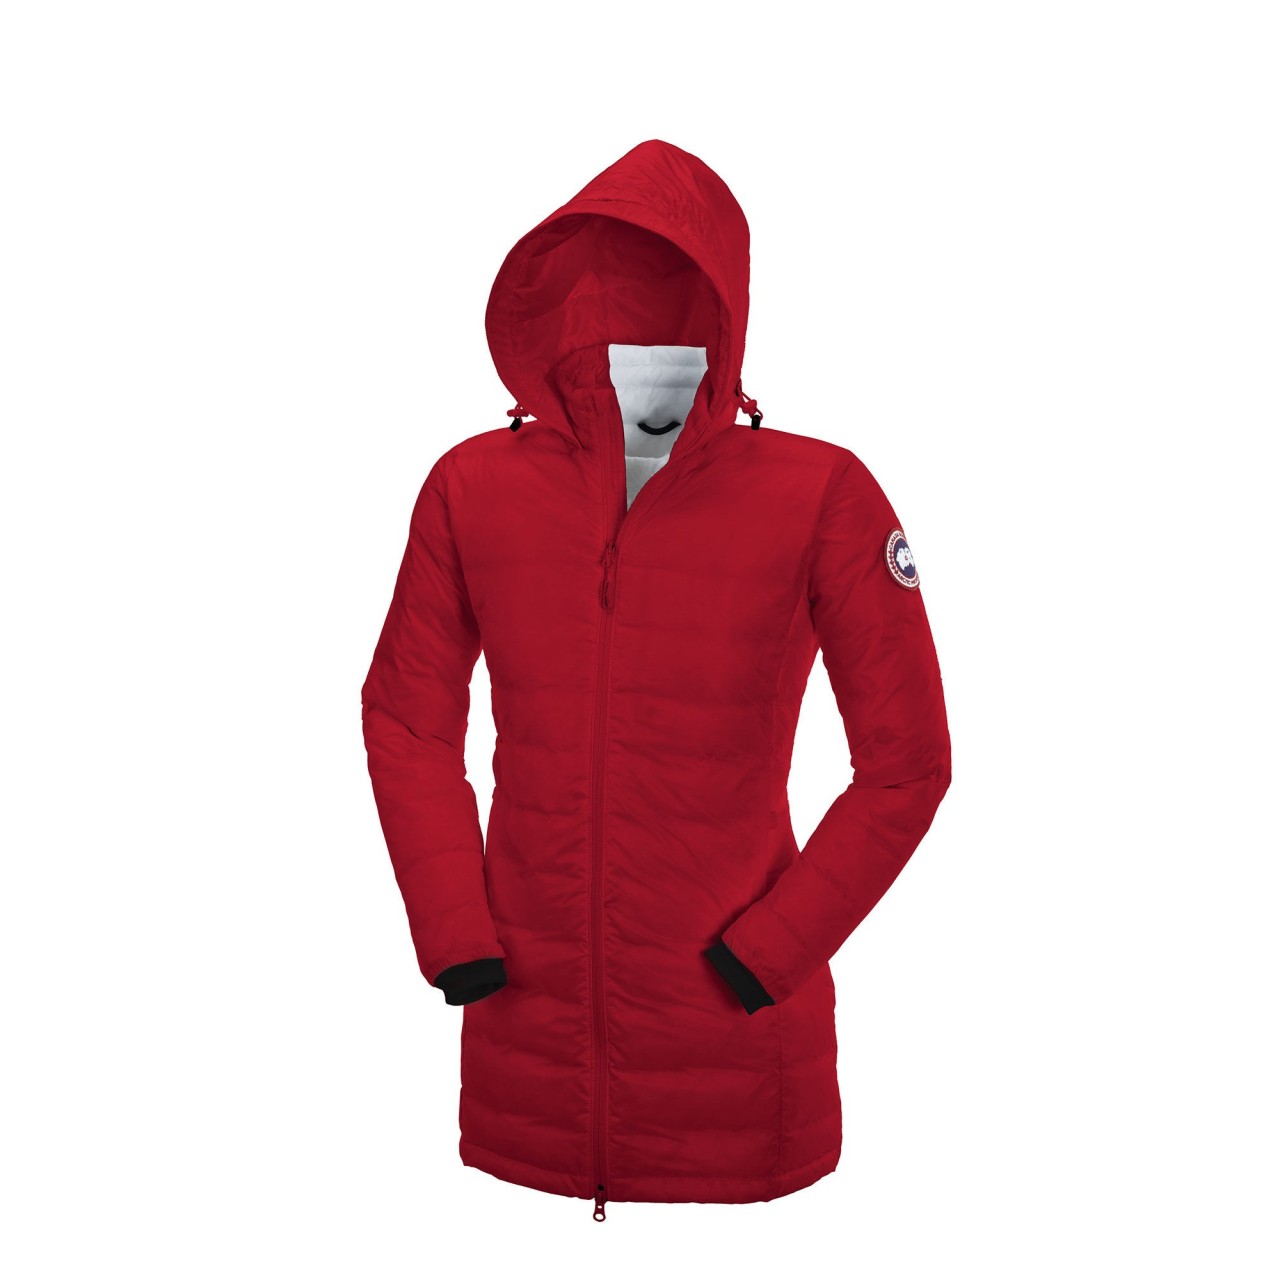 Canada Goose hats online authentic - 70% Off Cheap Canada Goose Jackets Sale